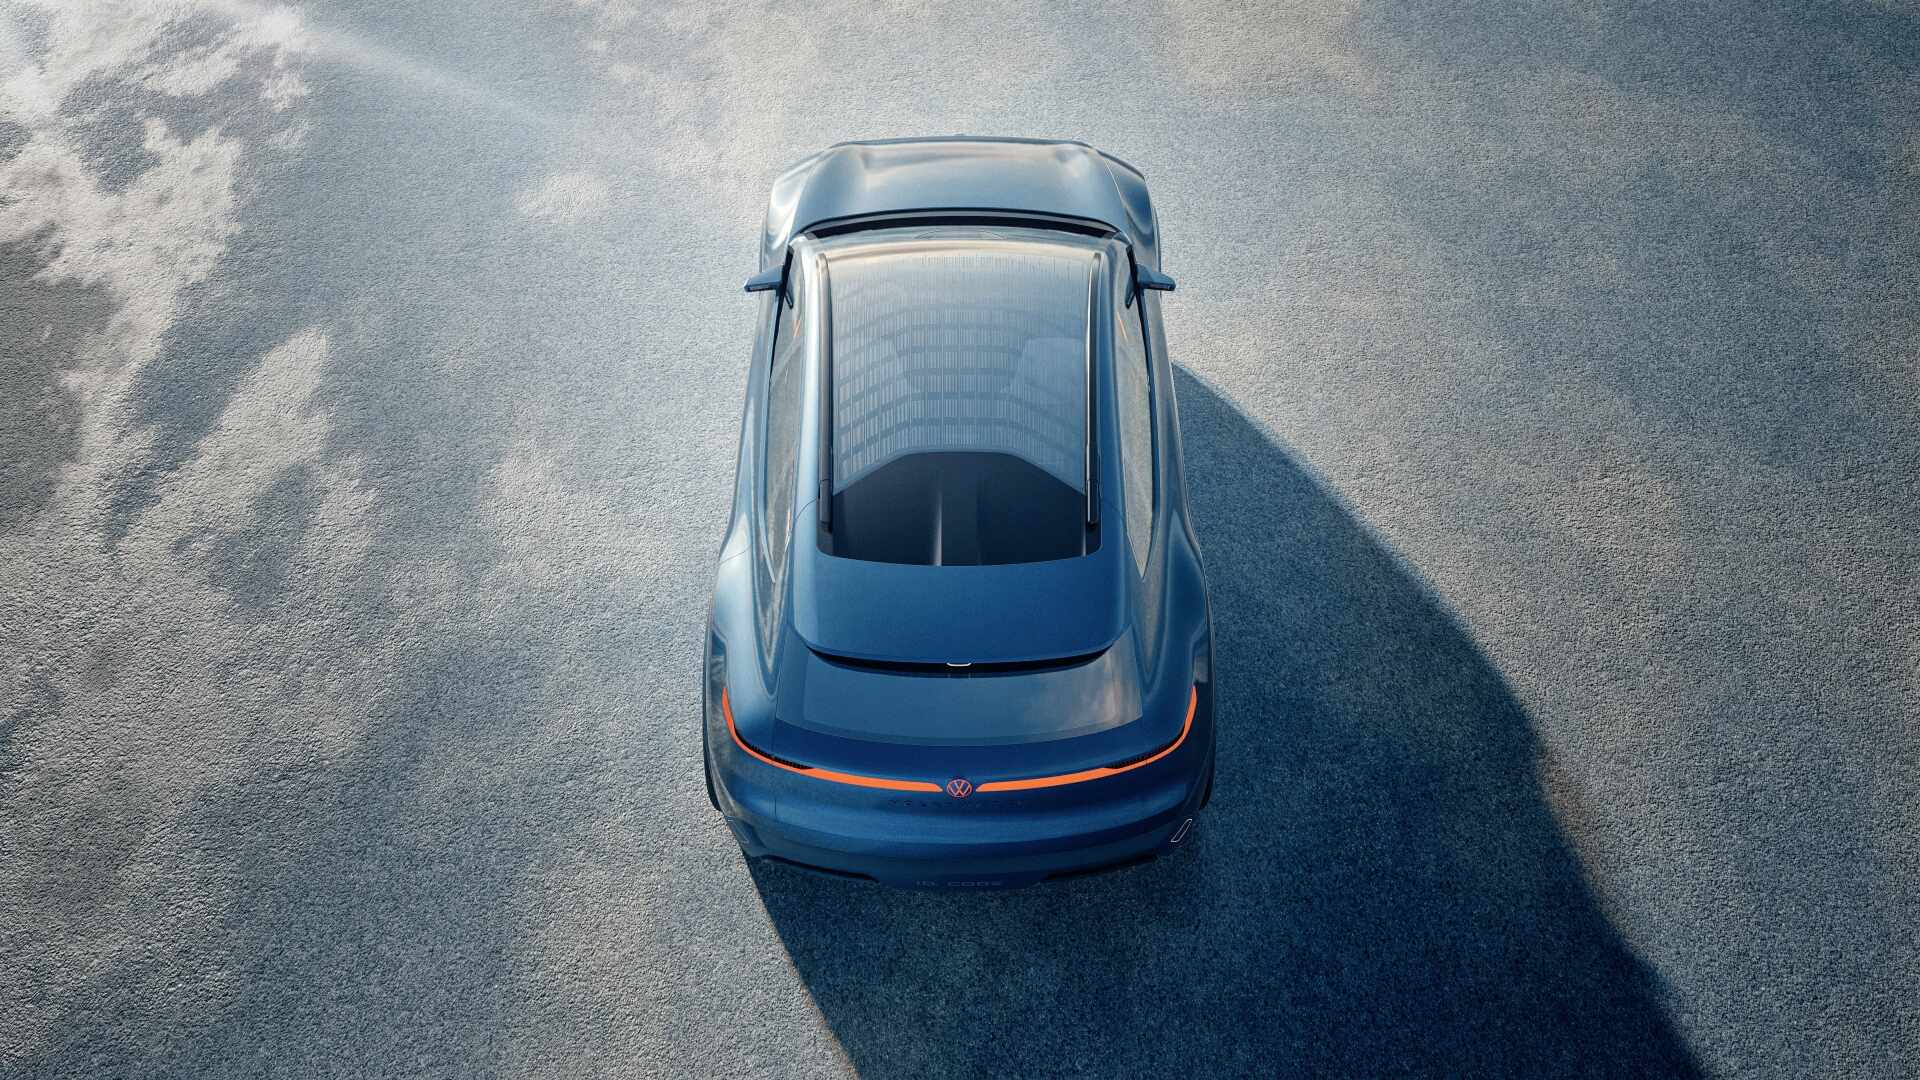 An Aerial View Of The Top And Rear Profile Of The New Volkswagen ID. CODE SUV Concept (Credits: Volkswagen Newsroom)